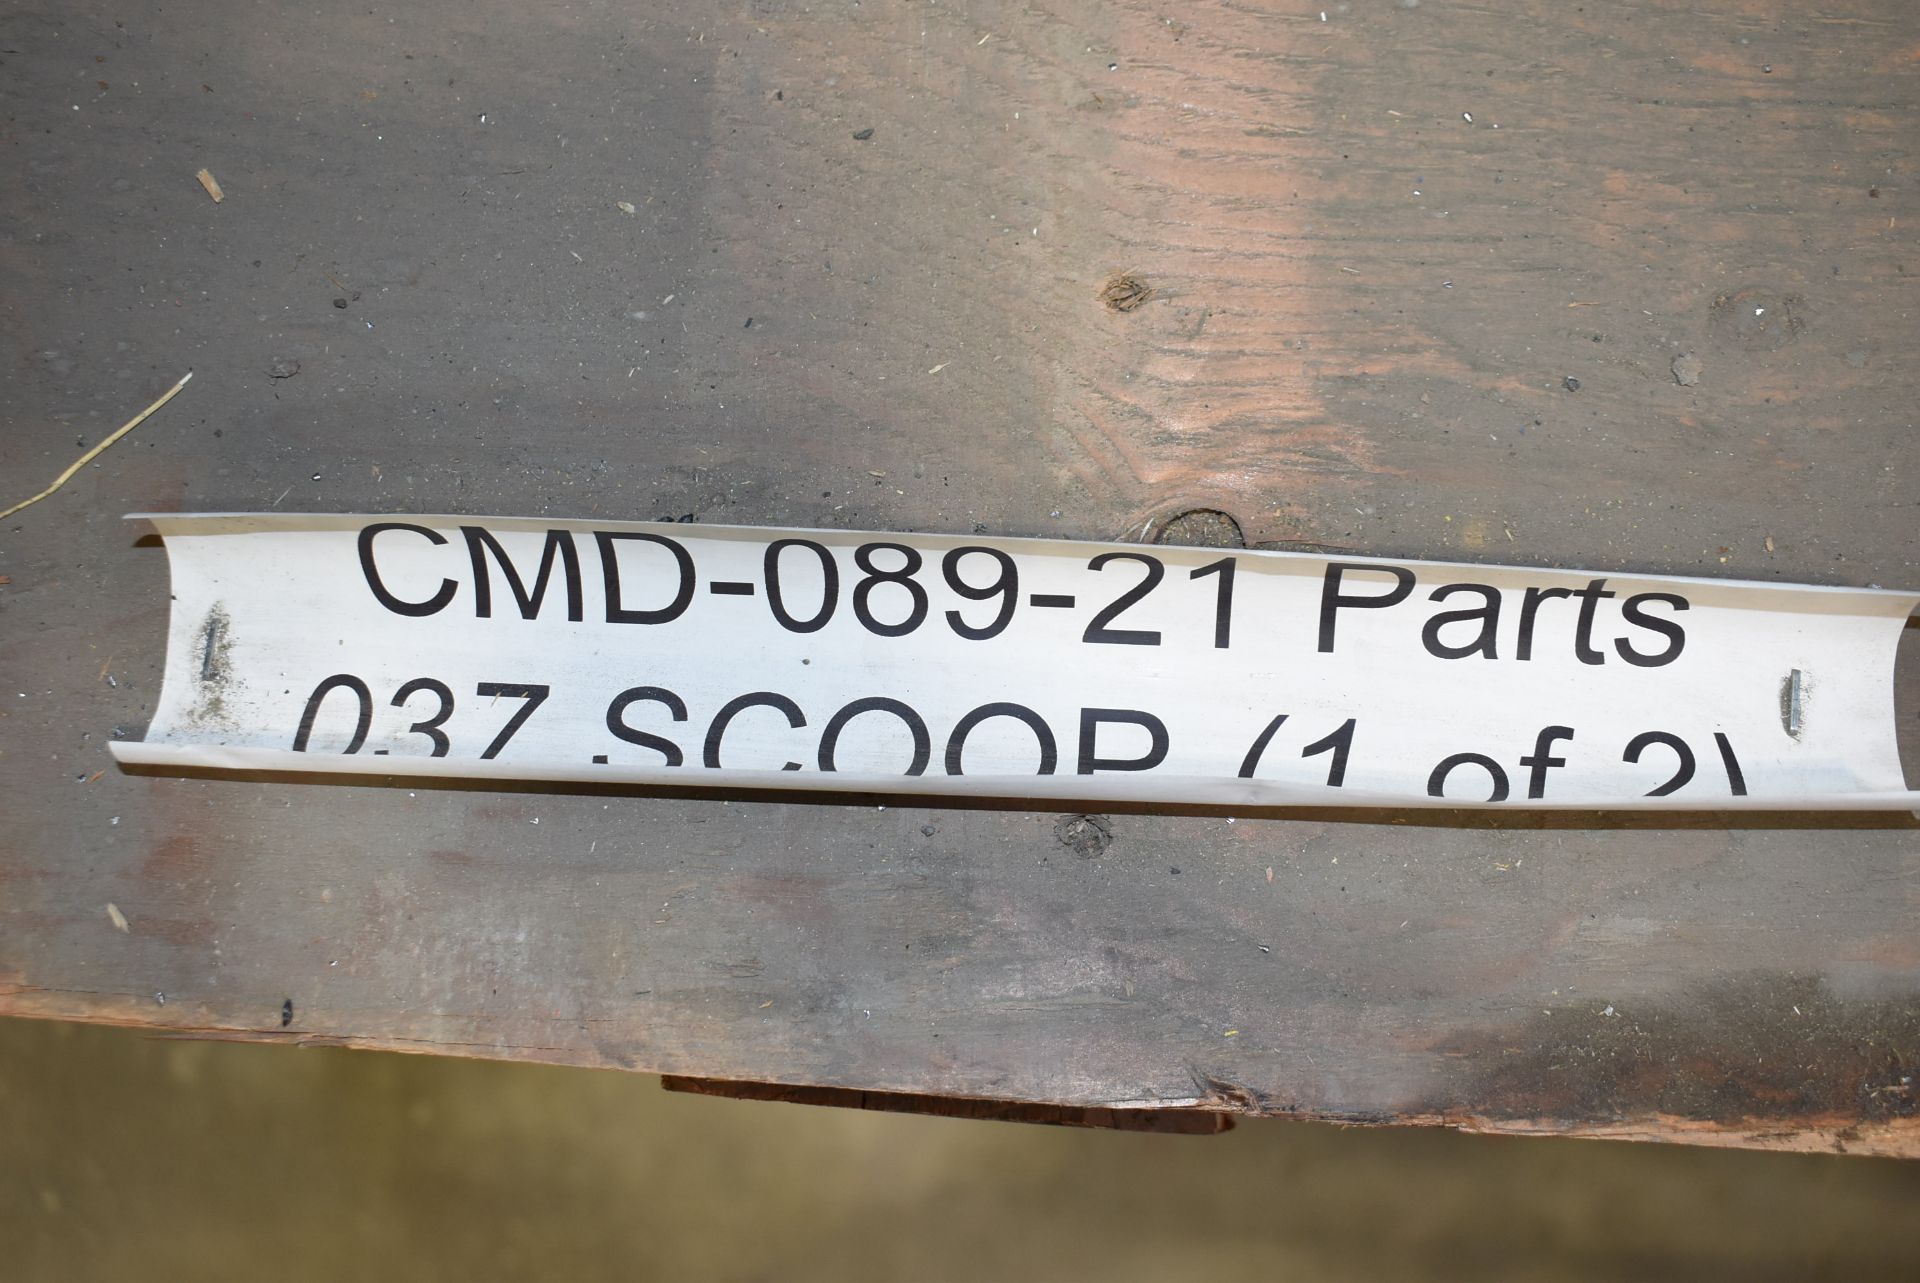 LOT/ CONTENTS OF PALLET CONSISTING OF SPARE PARTS FOR ATLAS COPCO ST14 SCOOP LOADER (CMD-089-21) - Image 4 of 4